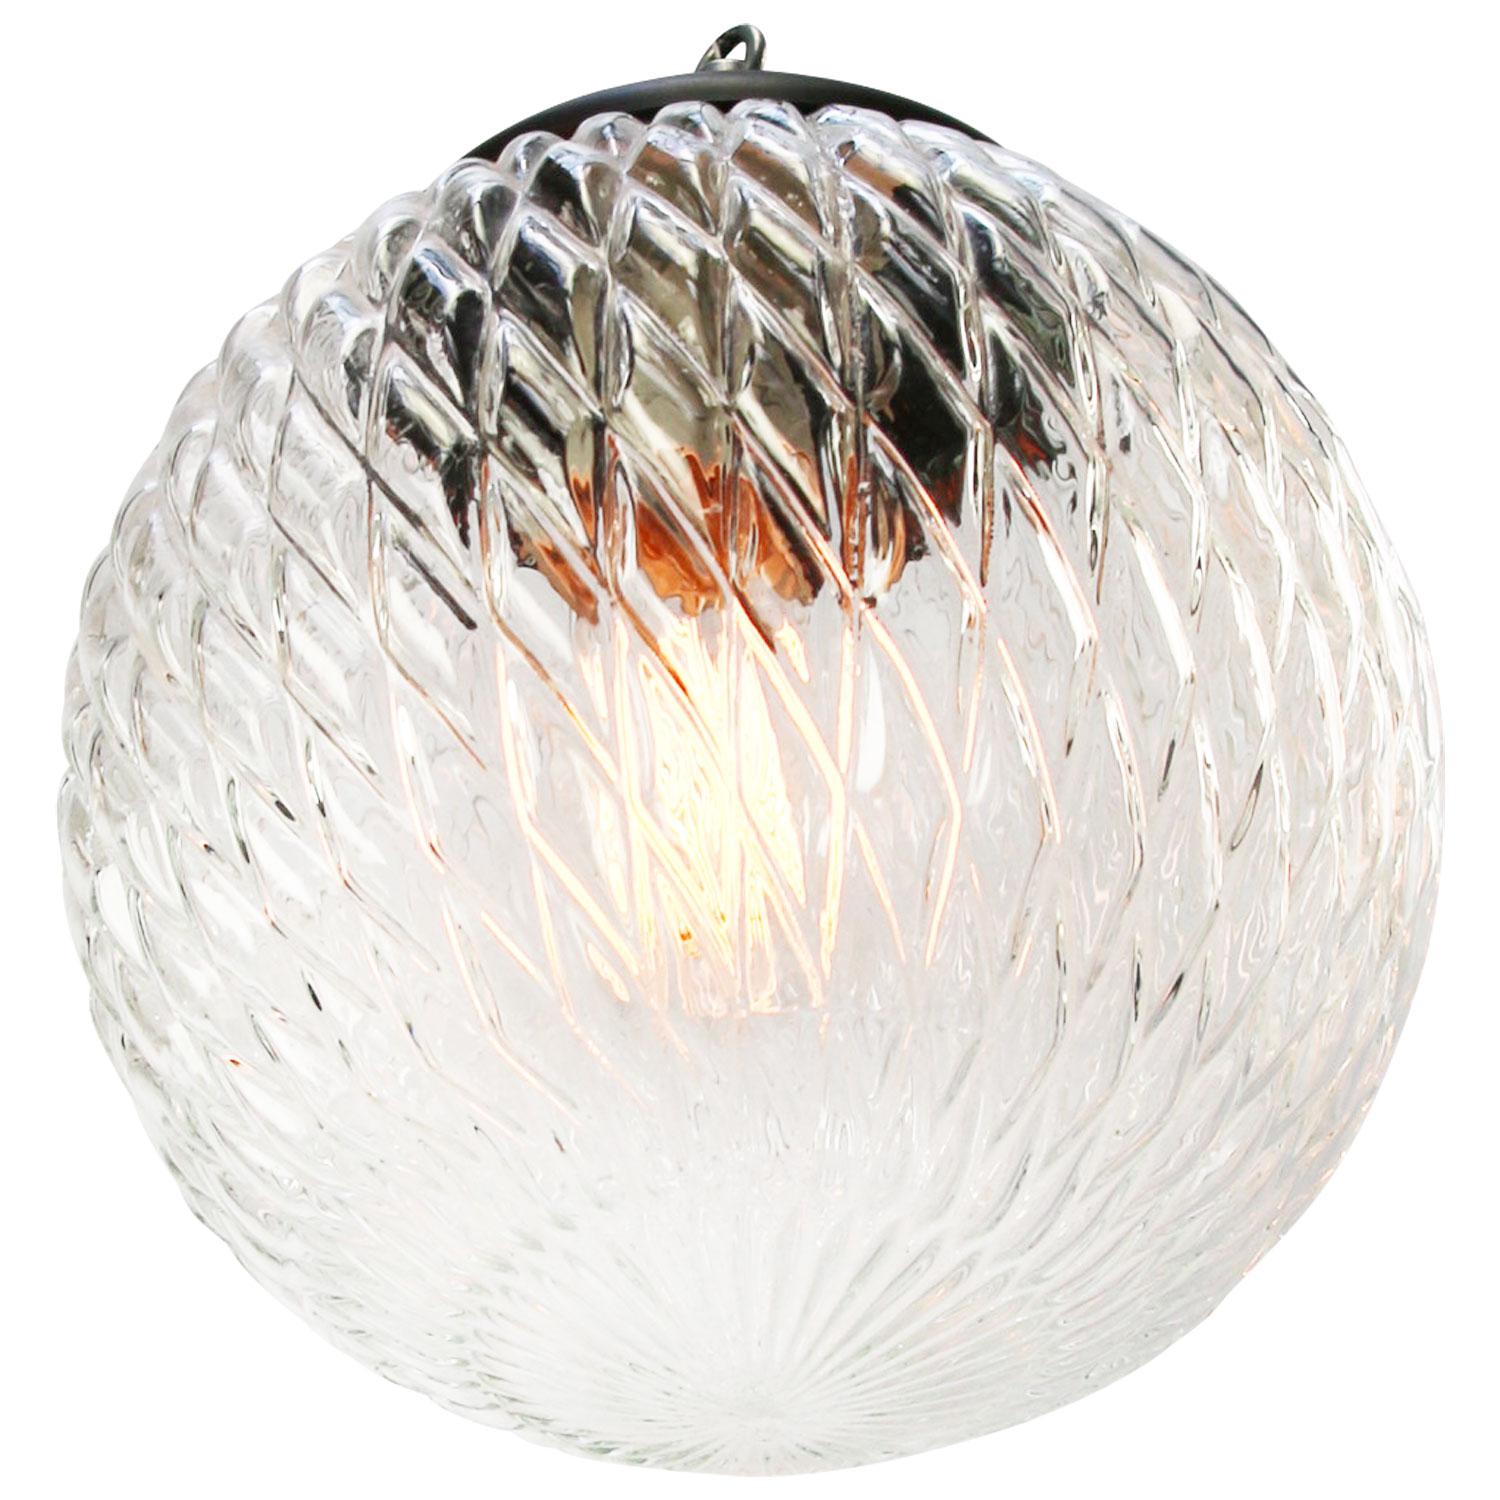 Clear texture globe glass pendant.

Weight: 2.00 kg / 4.4 lb

Priced per individual item. All lamps have been made suitable by international standards for incandescent light bulbs, energy-efficient and LED bulbs. E26/E27 bulb holders and new